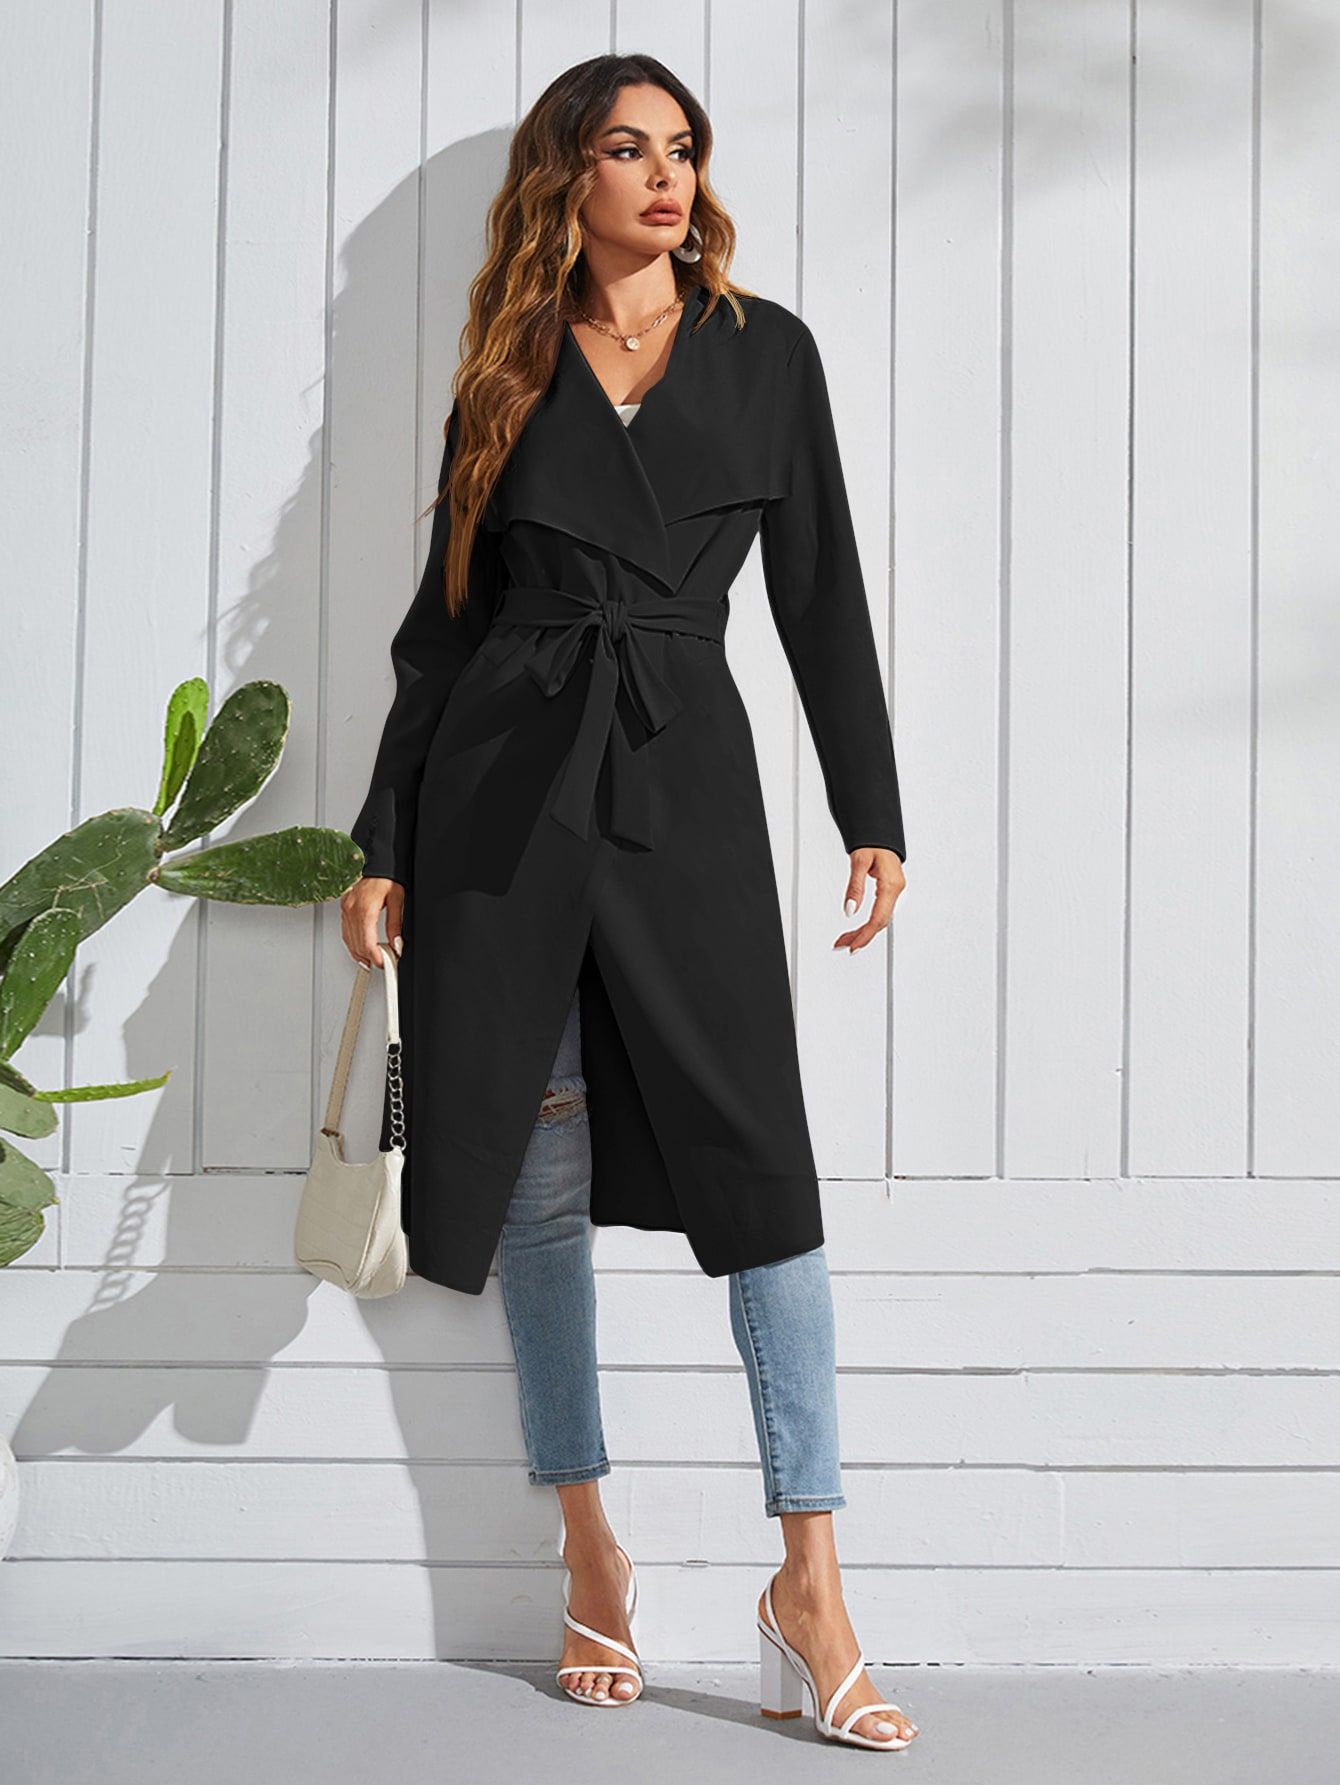 SHEIN Waterfall Collar Open Front Belted Coat | SHEIN